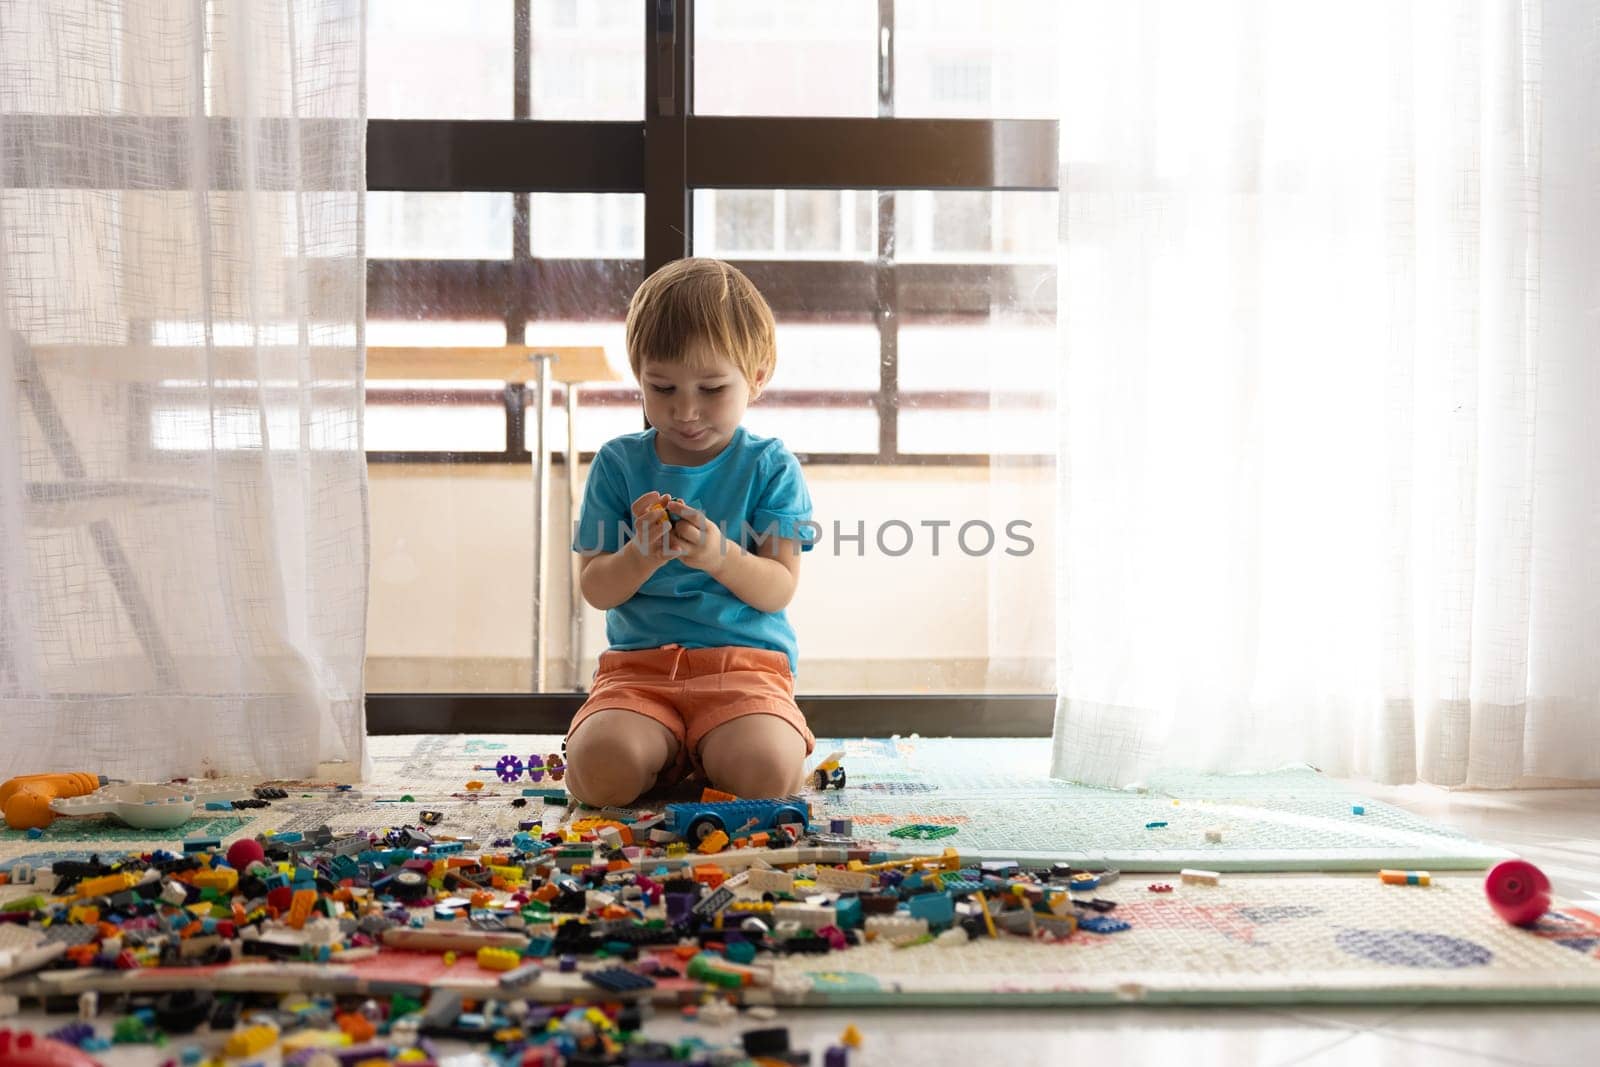 A little boy sitting on the floor in front of a window